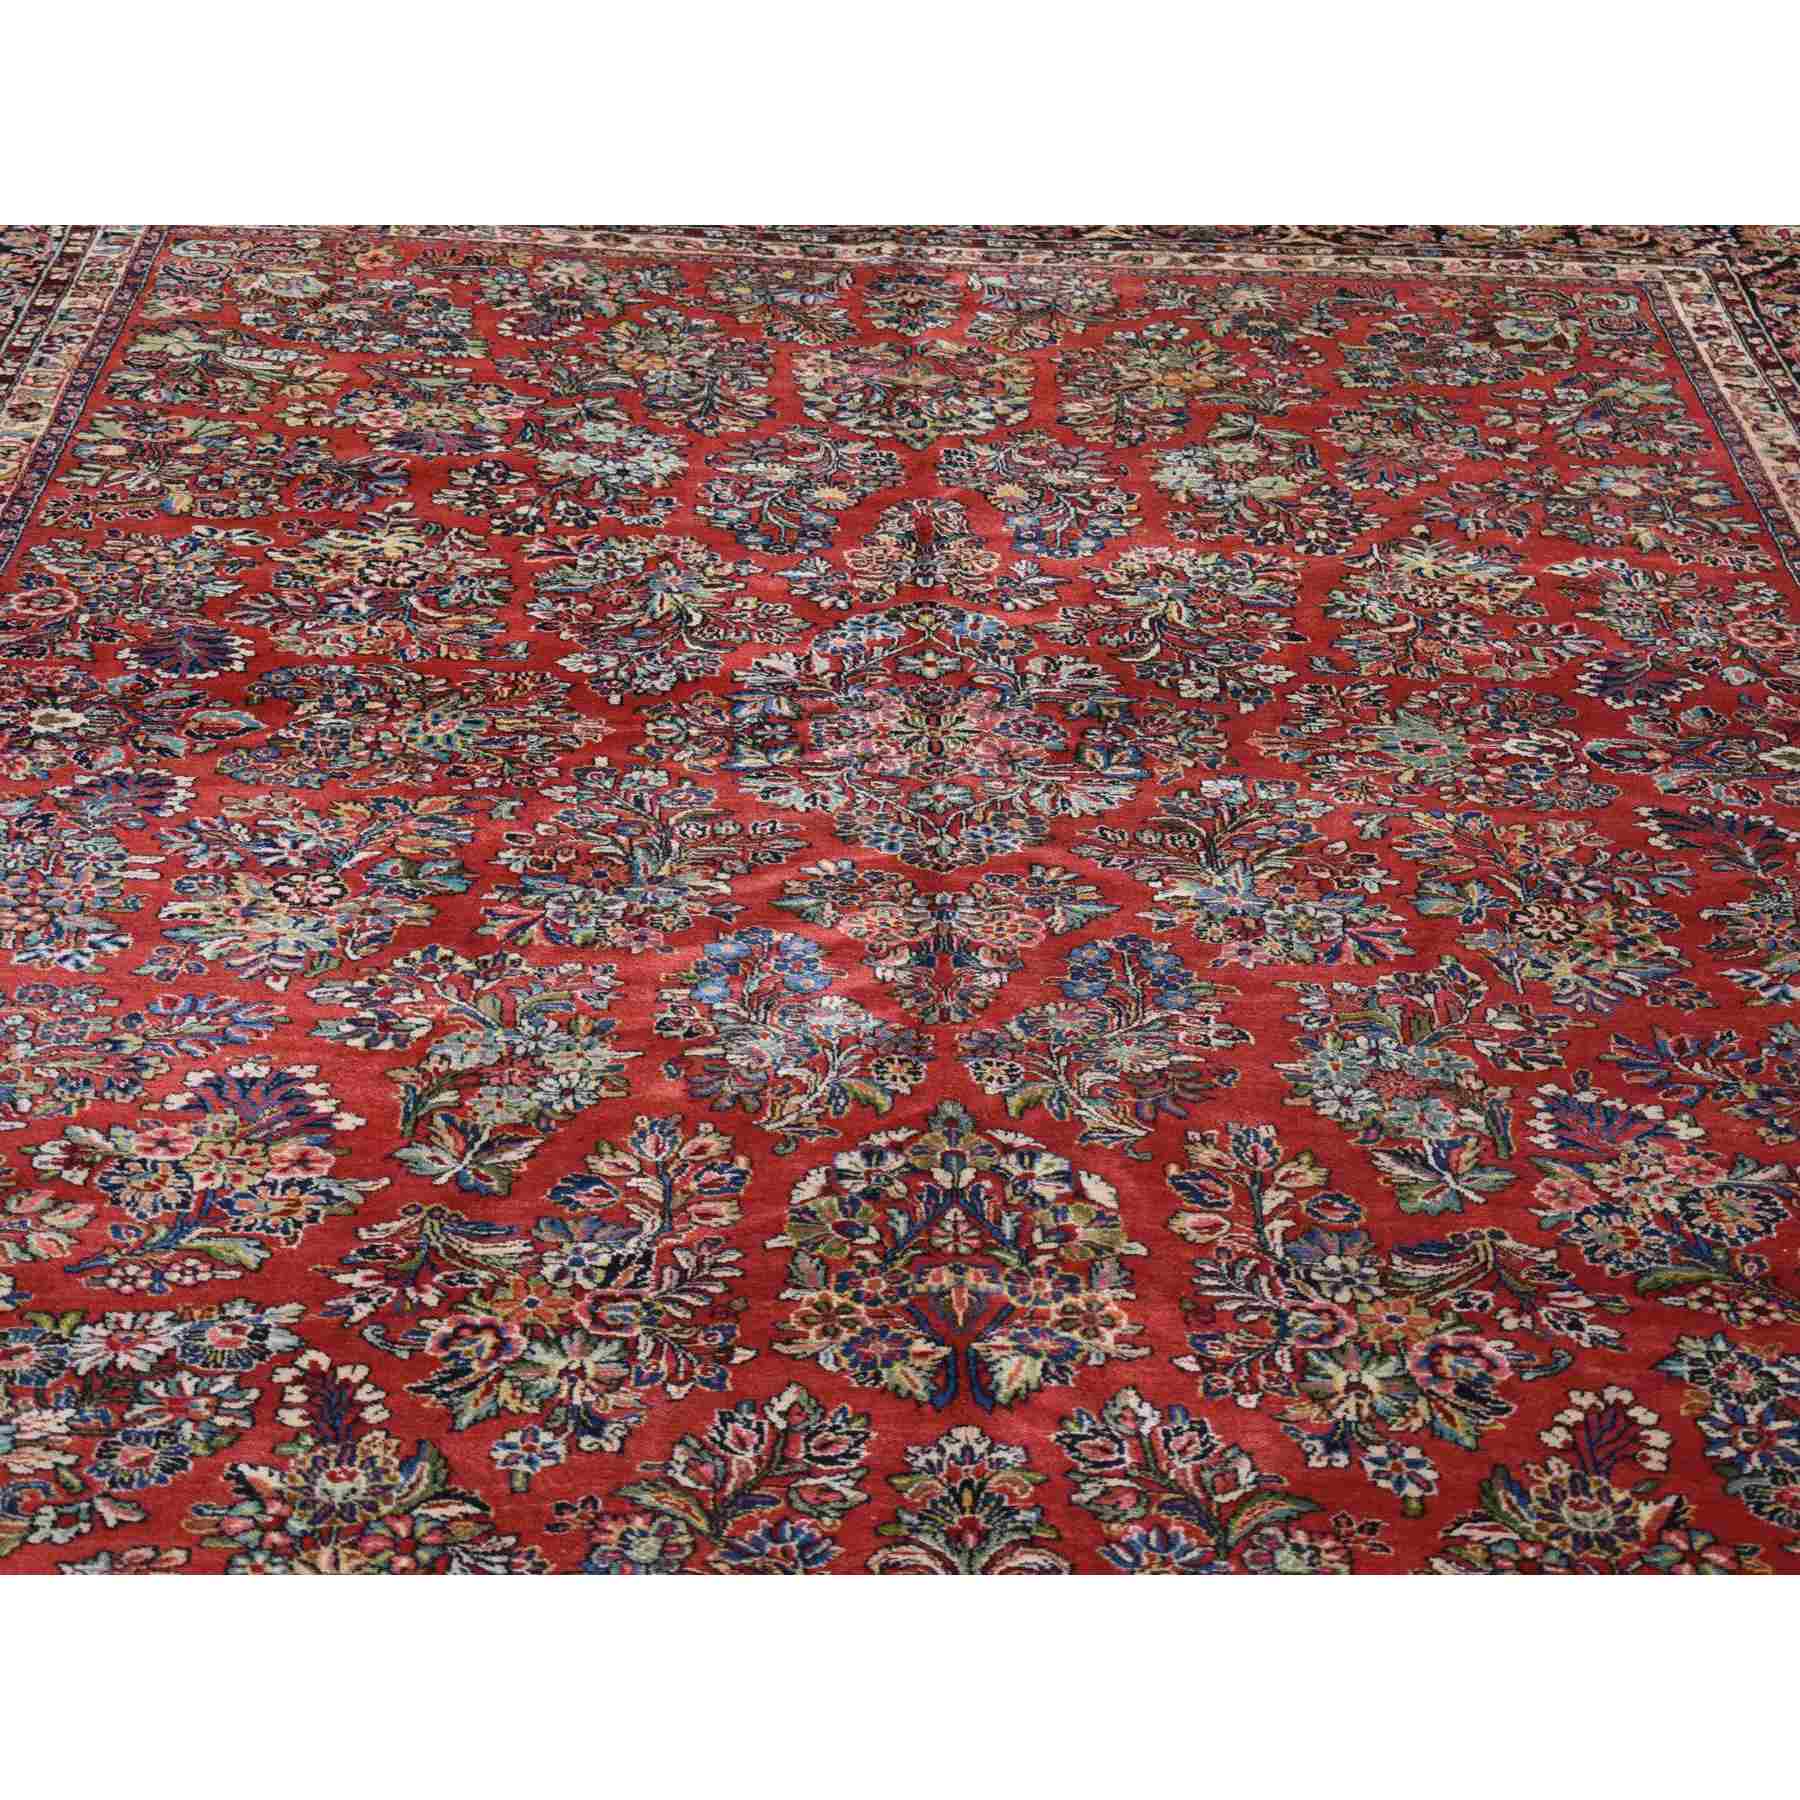 Antique-Hand-Knotted-Rug-400270